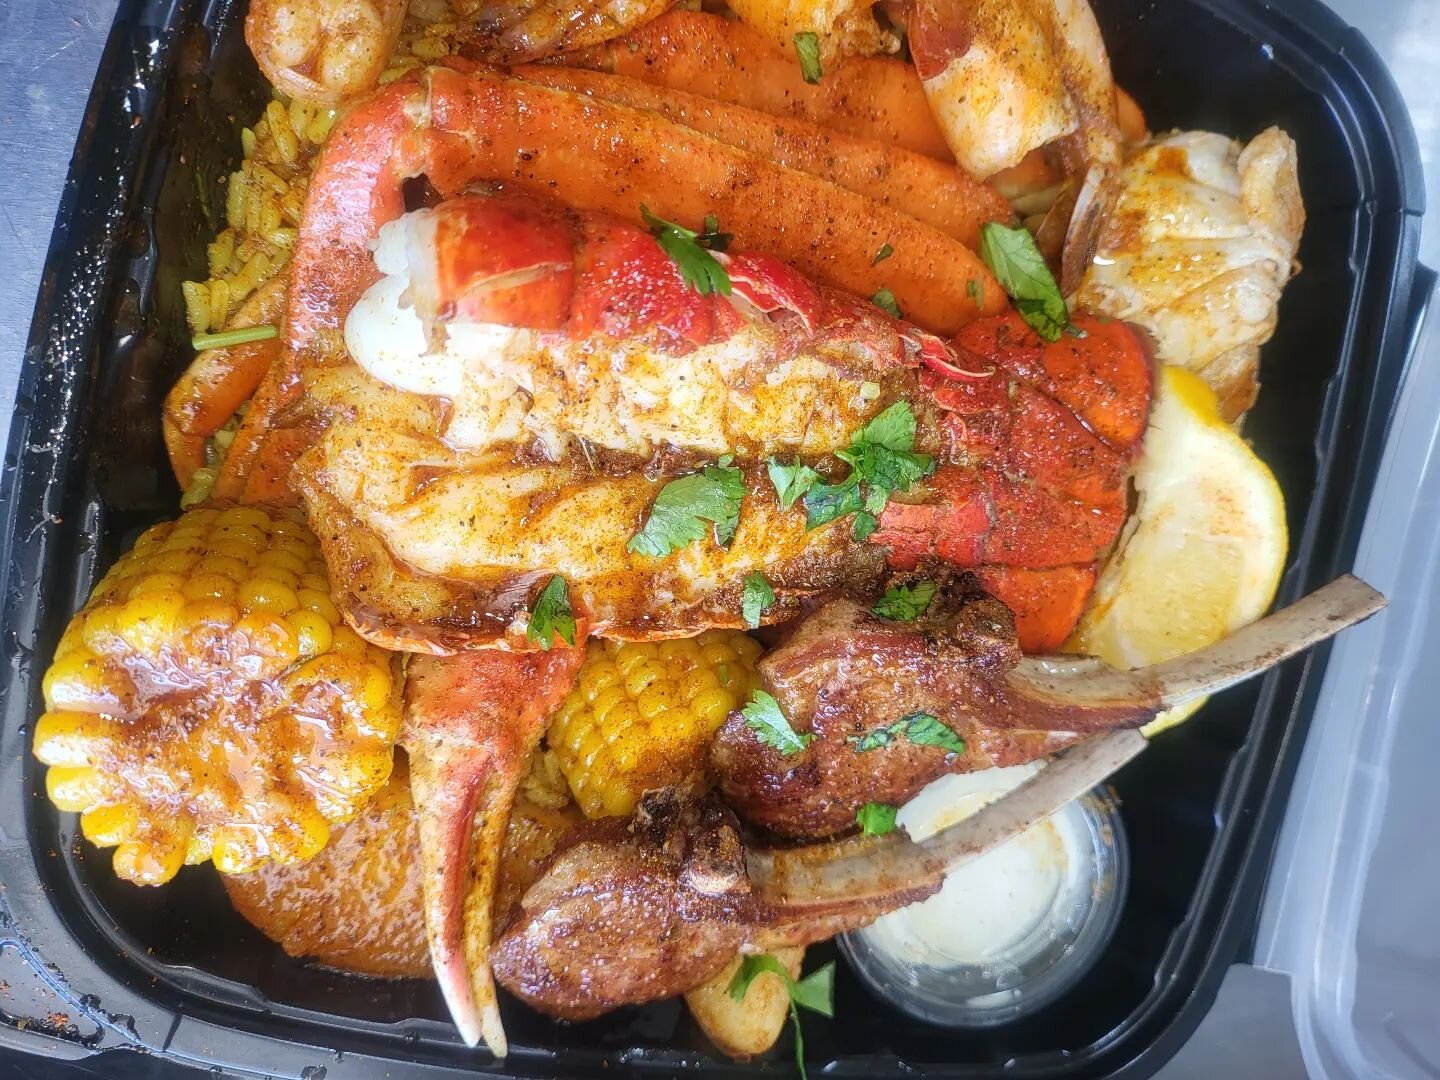 Lobster Tail &amp; Crab Leg Boil over rice w/ potatoes and corn. With added lamb chops on the side and can't forget the buttery roll!
#RoundTheWayEatery #BestFoodTruckInTheCity #StopPlayinWithUs #SeafoodLovers #CltBucketList #CltFoodTruck #LambChops 